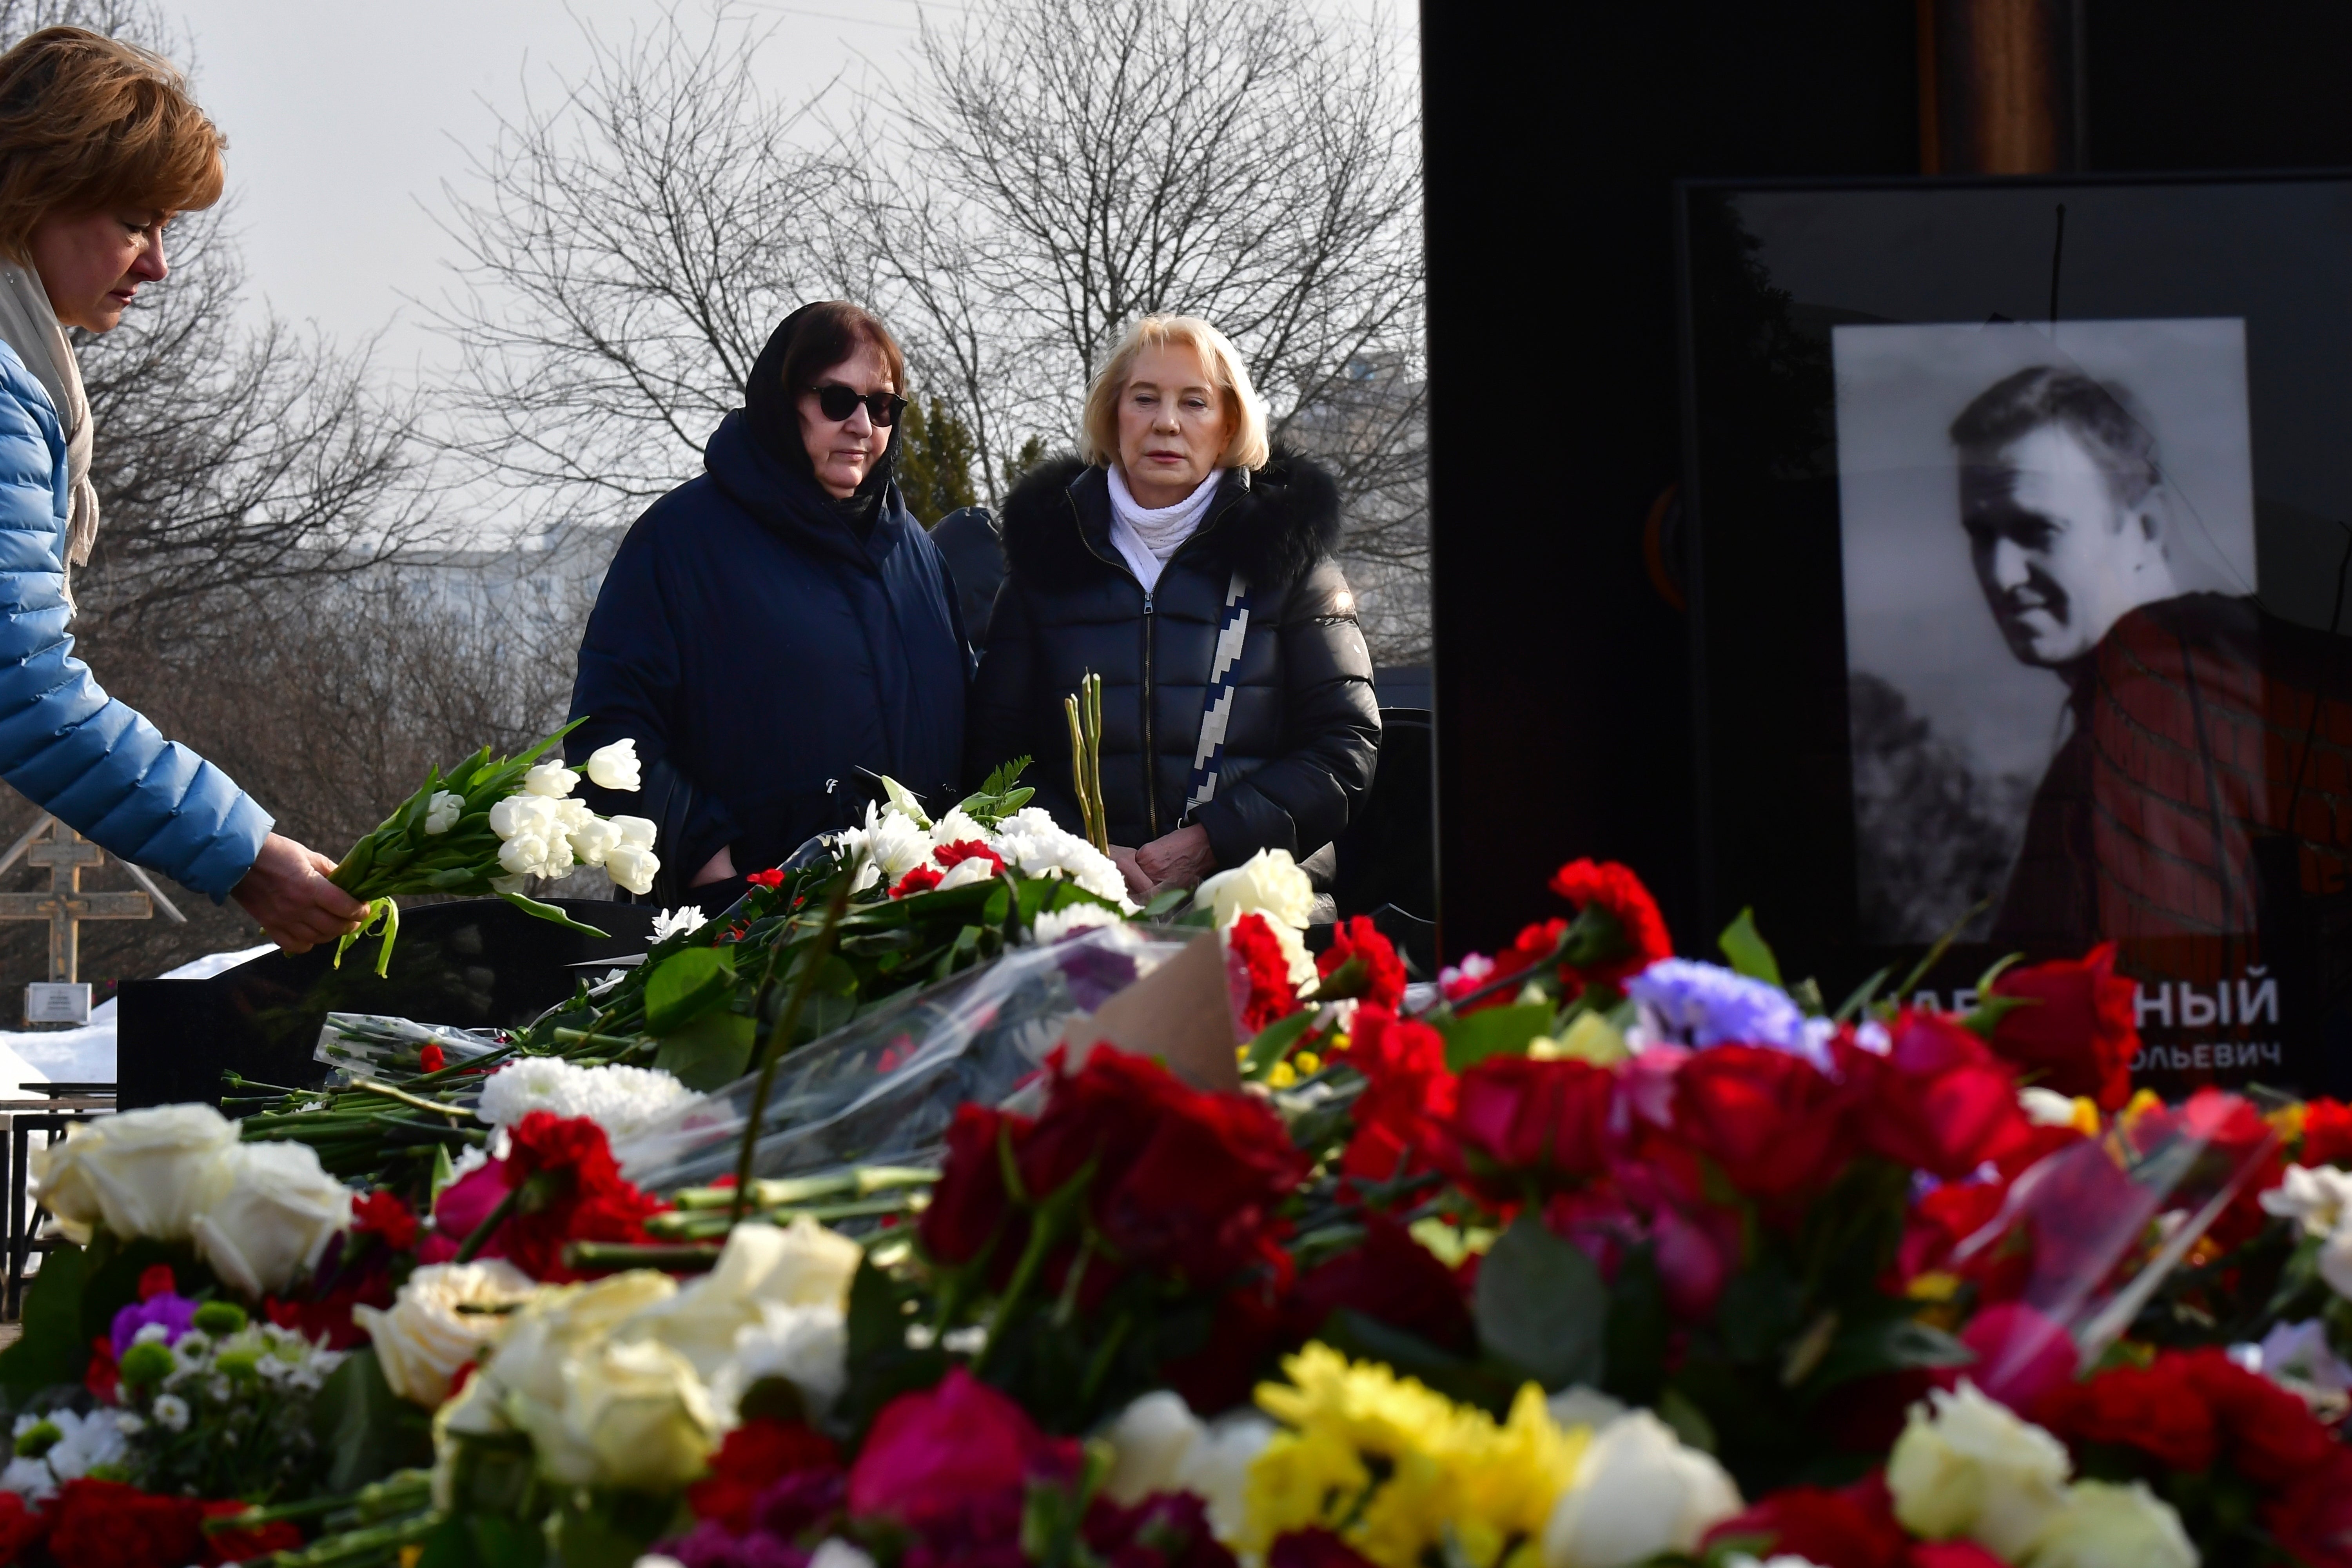 Russian opposition leader Alexei Navalny's mother, Lyudmila Navalnaya, center left, and his mother-in-law Alla Abrosimova visit his grave at the Borisovskoye Cemetery, in Moscow